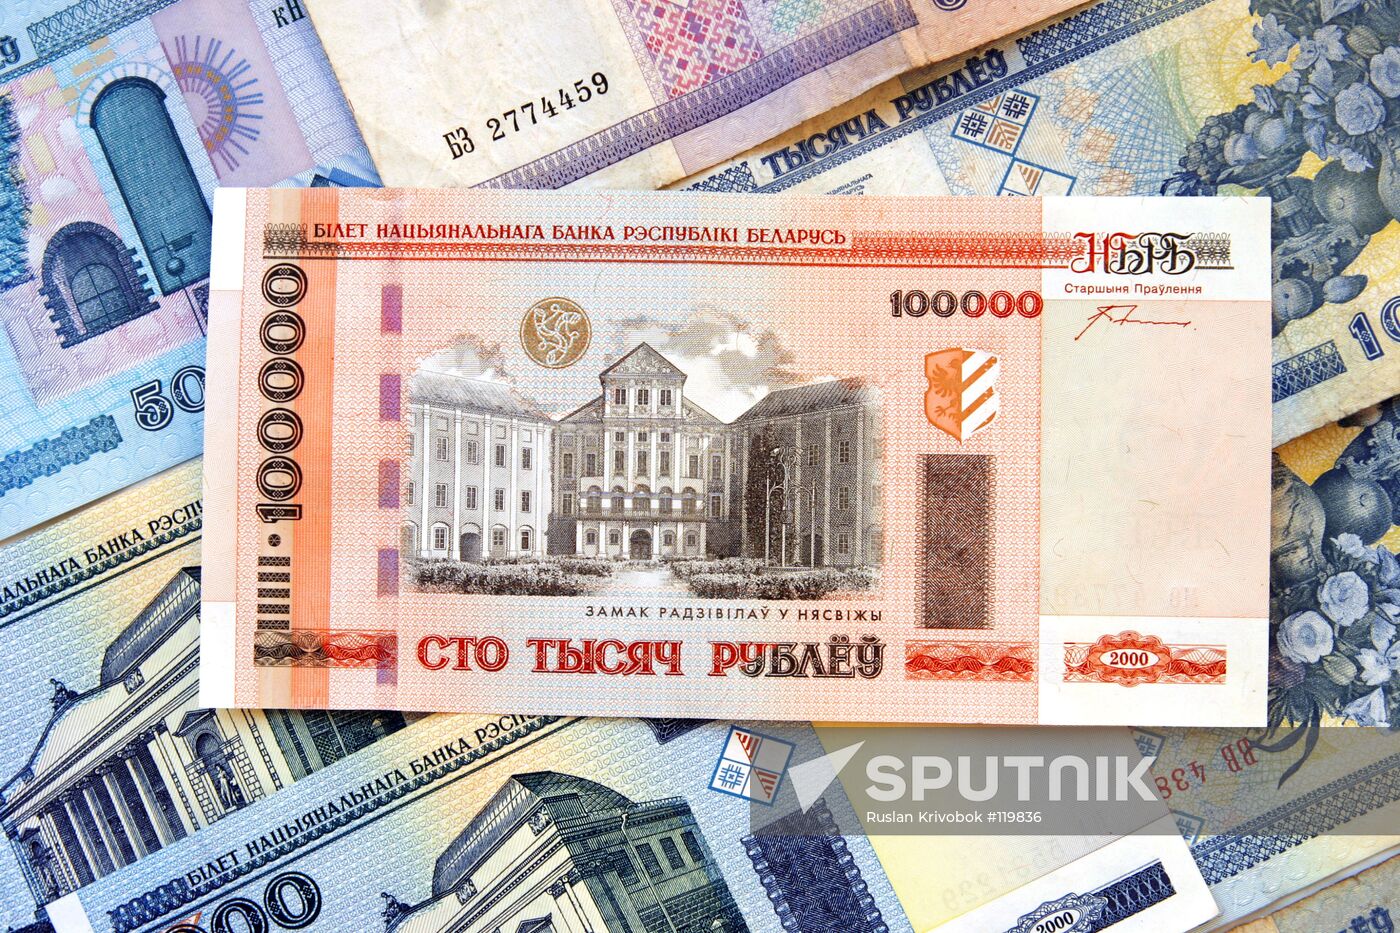 one hundred thousand Belarussian rubles money